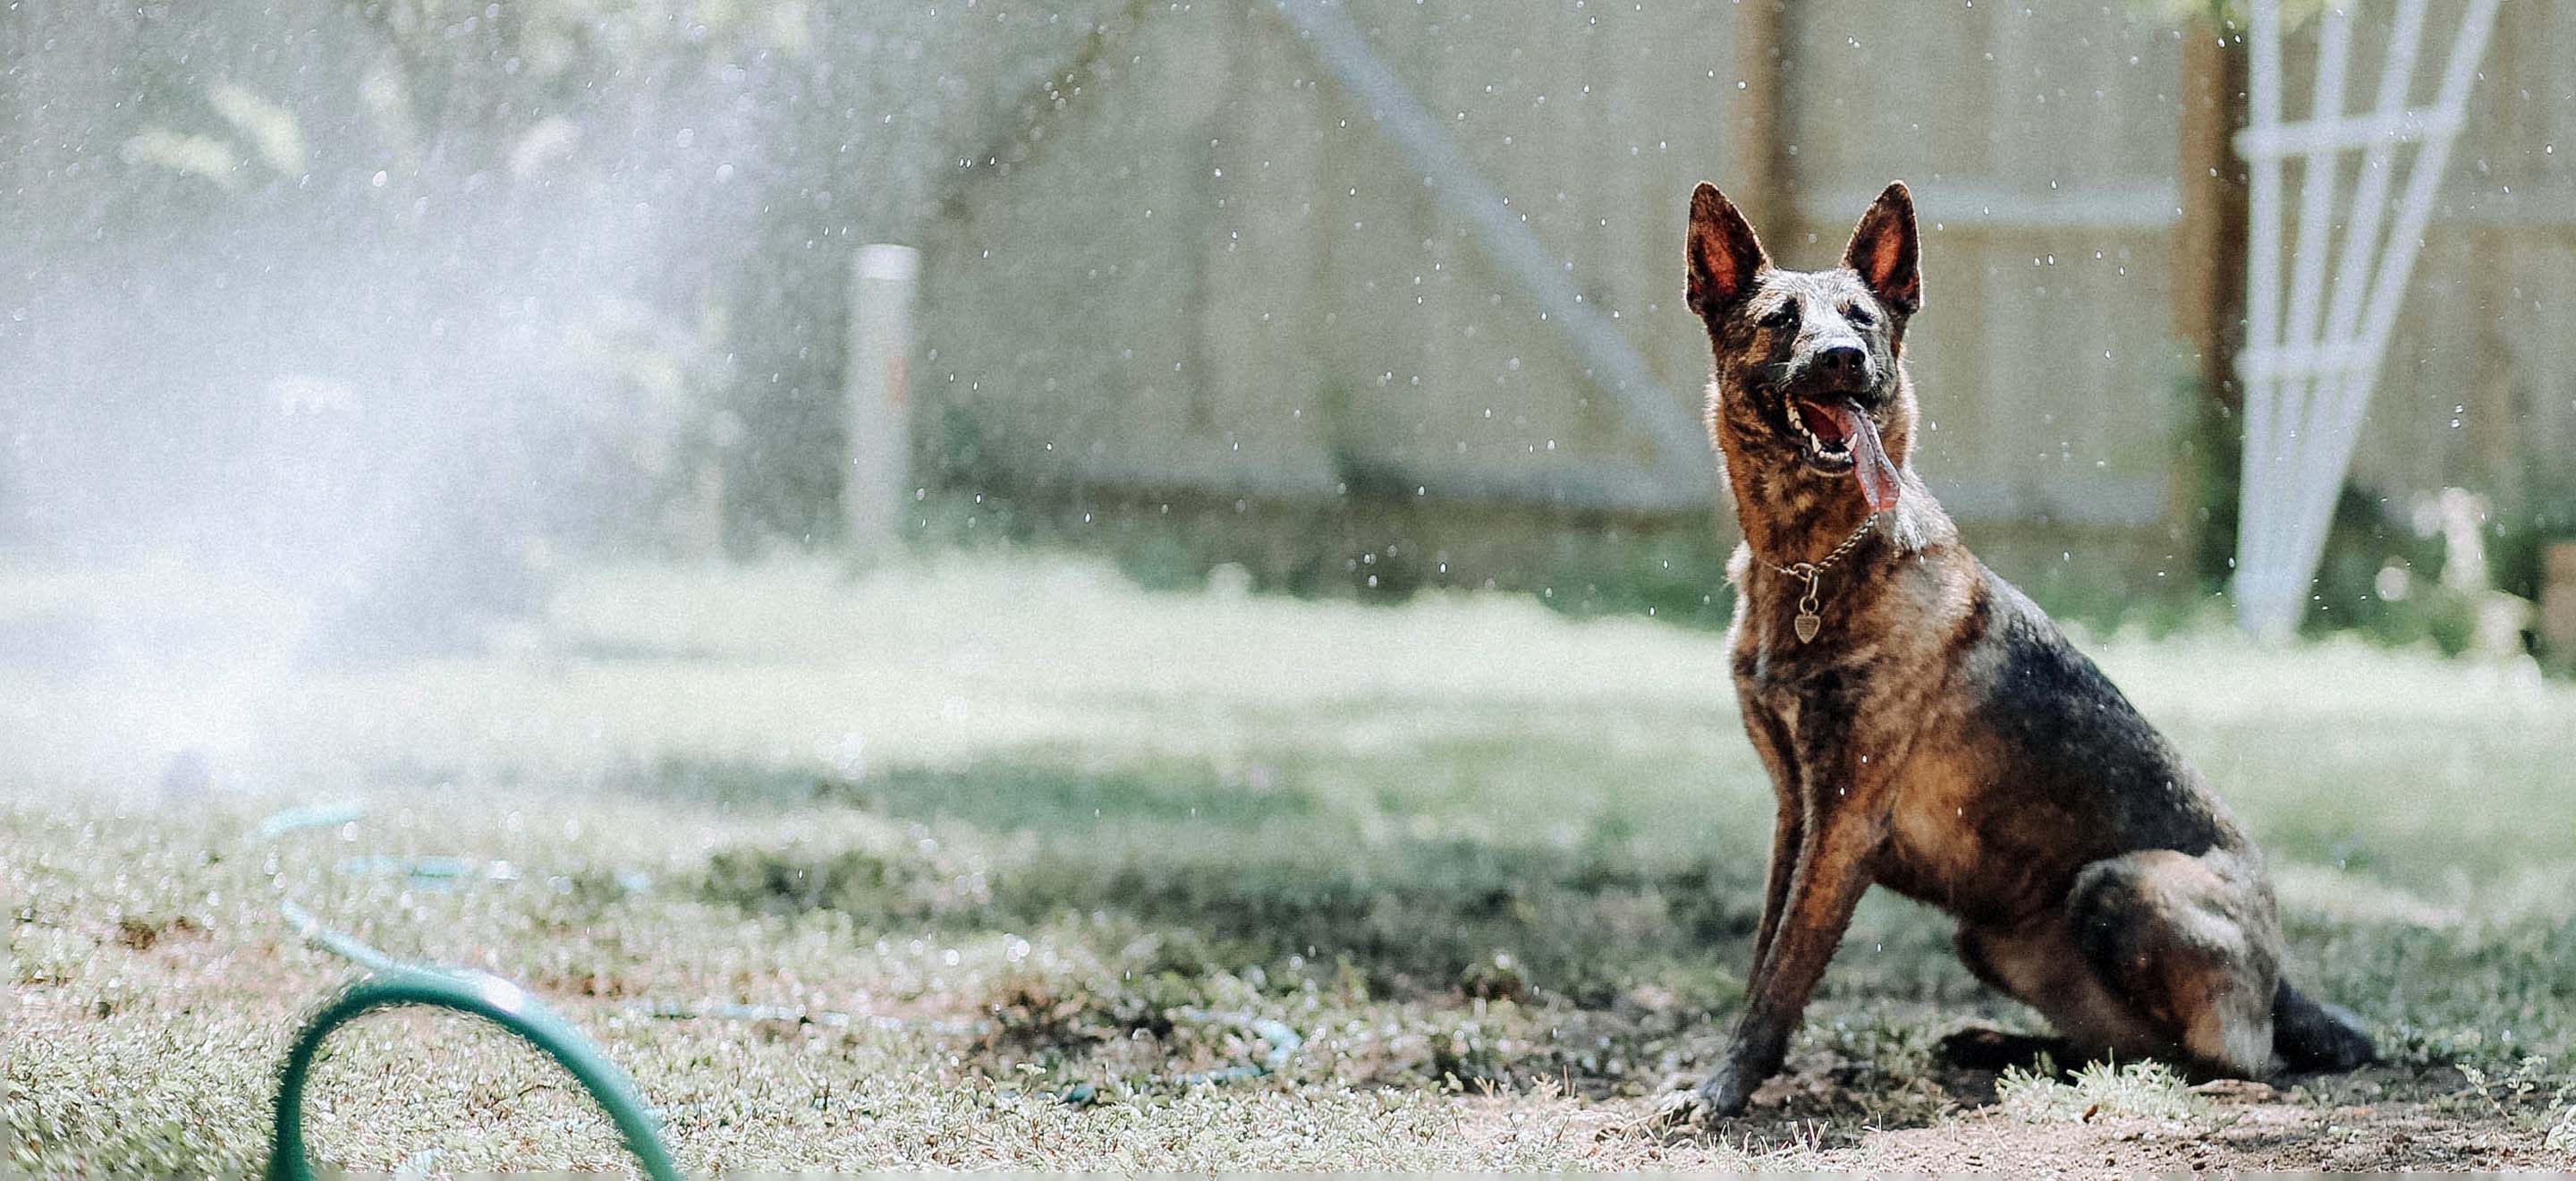 A Belgian Shepherd sitting in the backyard enjoying the spray of water from the hose image